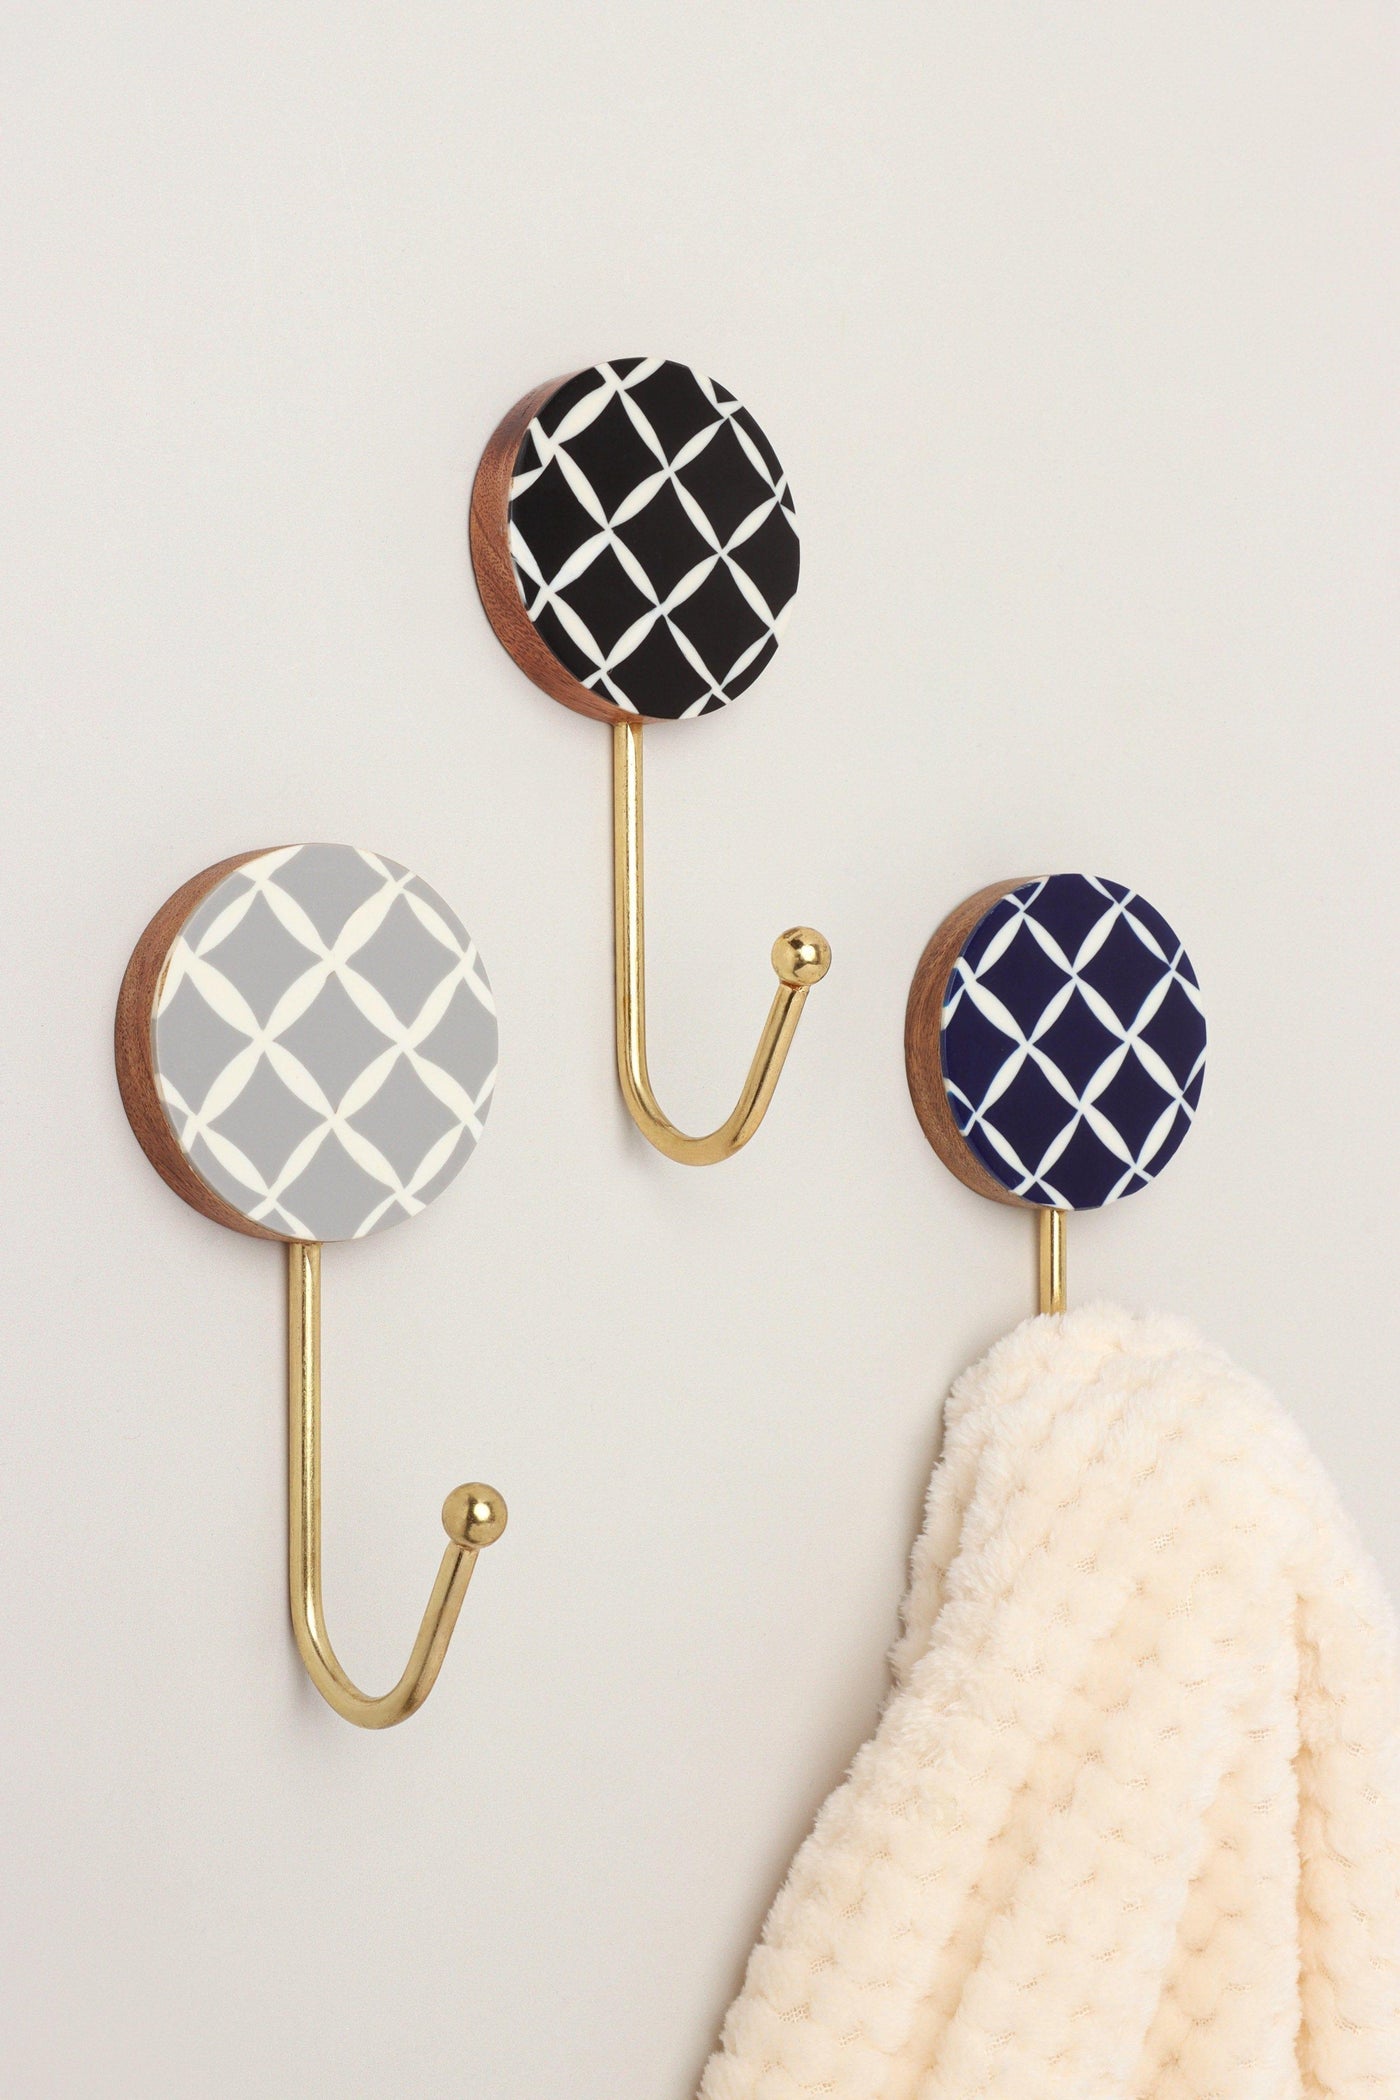 Gdecorstore Cabinet Knobs & Handles Mosaic Large Circle Disk Wood and Resin Brass Geometric Wall Organizer Coat Hook